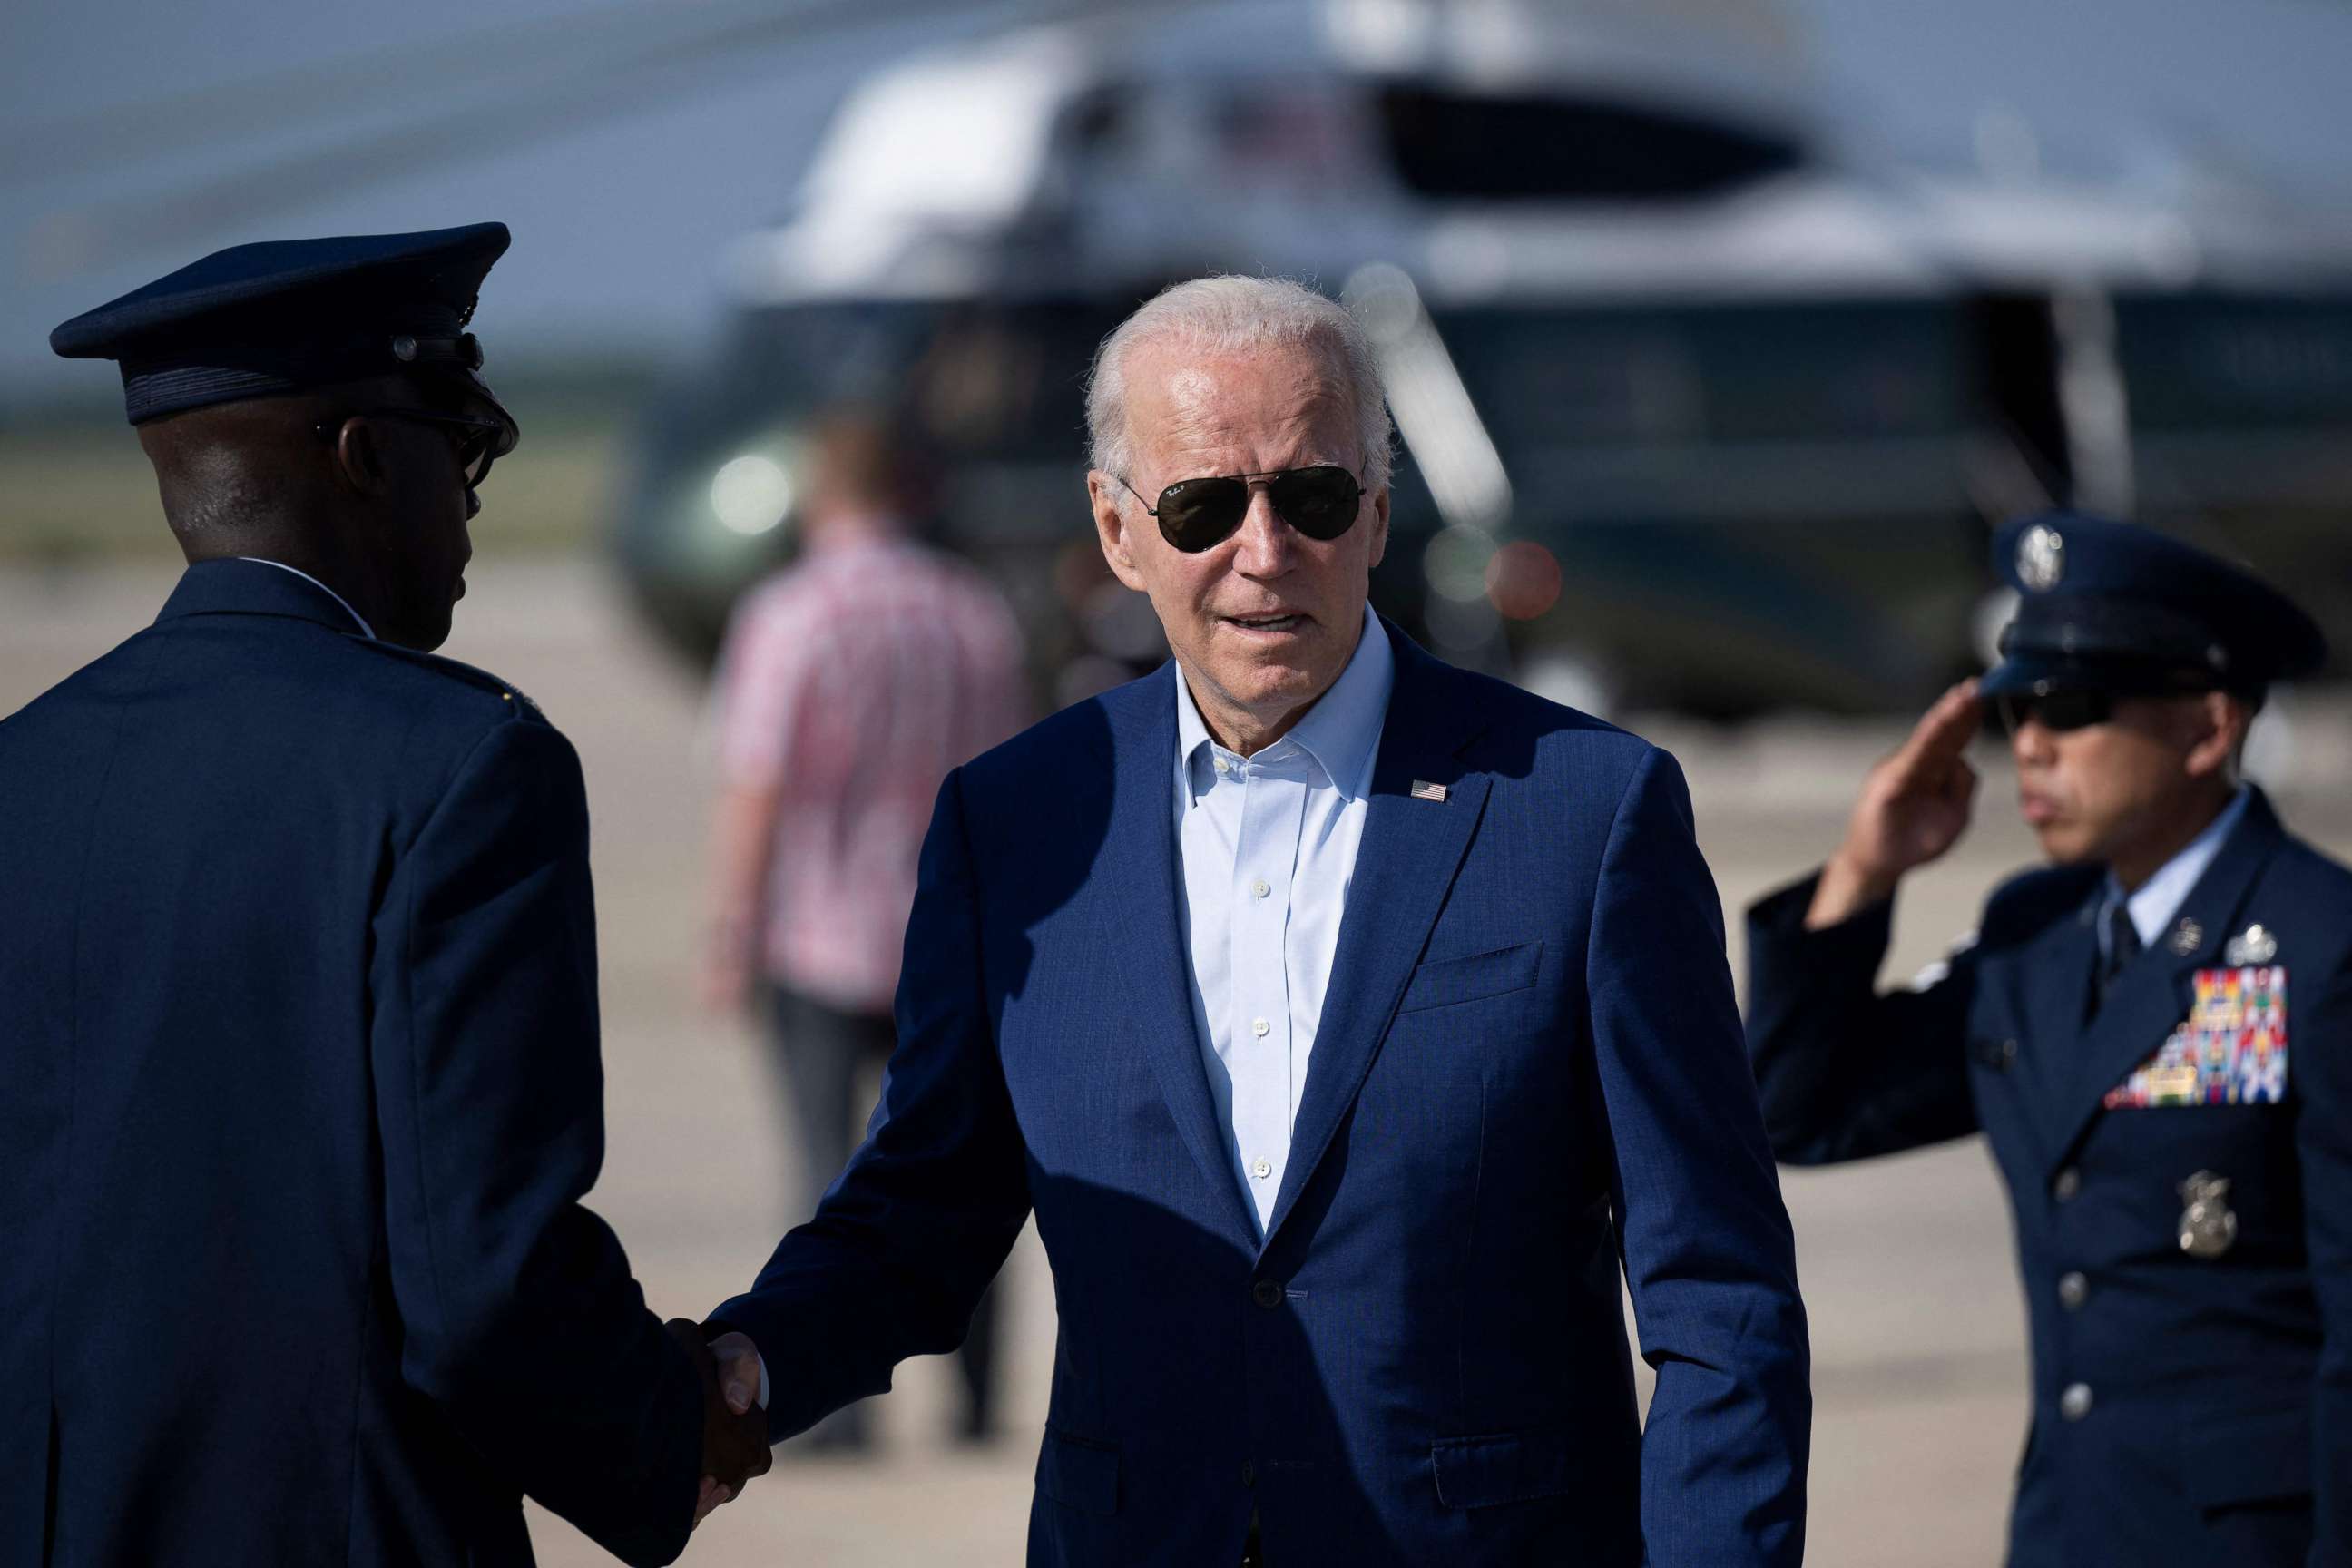 PHOTO: U.S. President Joe Biden disembarks Air Force One at Joint Base Andrews in Maryland on July 20, 2022.